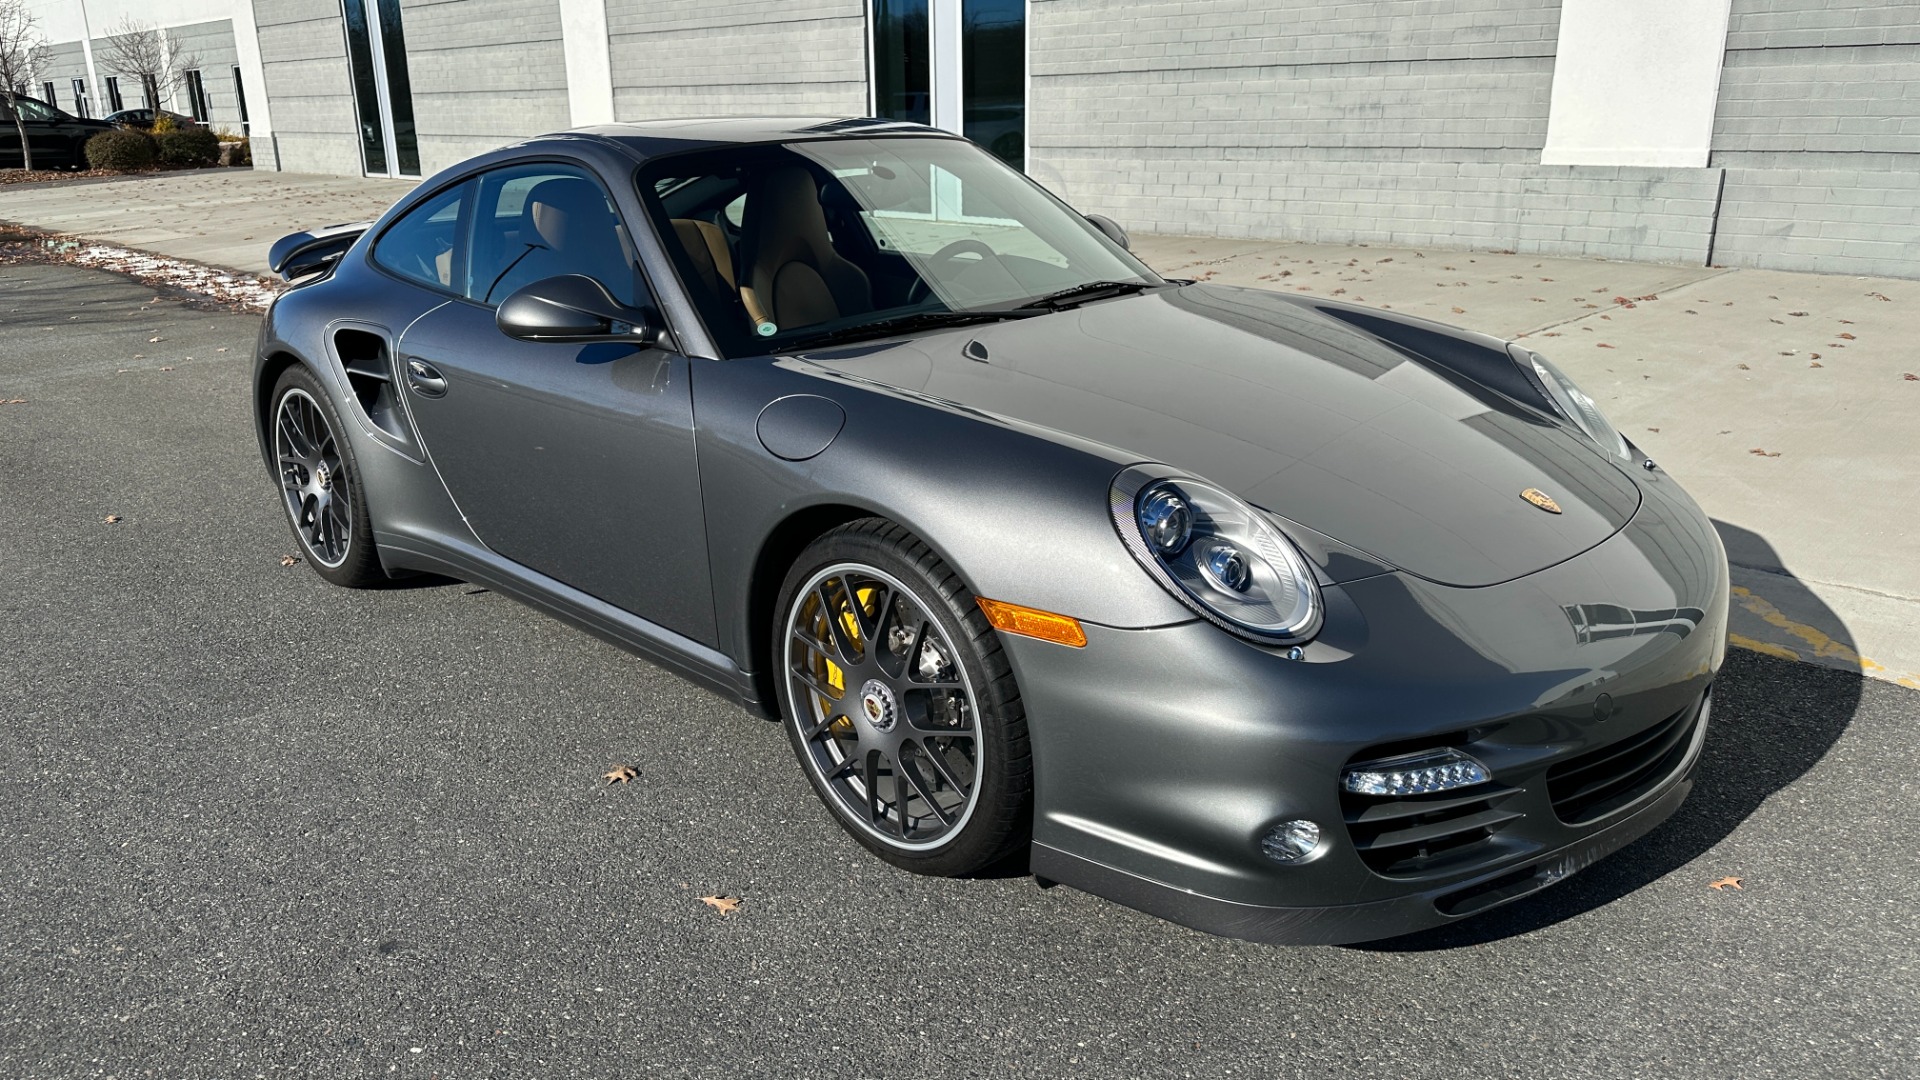 Used 2012 Porsche 911 TURBO S / CENTER LOCK WHEELS / FULL LEATHER INTERIOR / YELLOW CALIPERS / PA for sale Sold at Formula Imports in Charlotte NC 28227 5